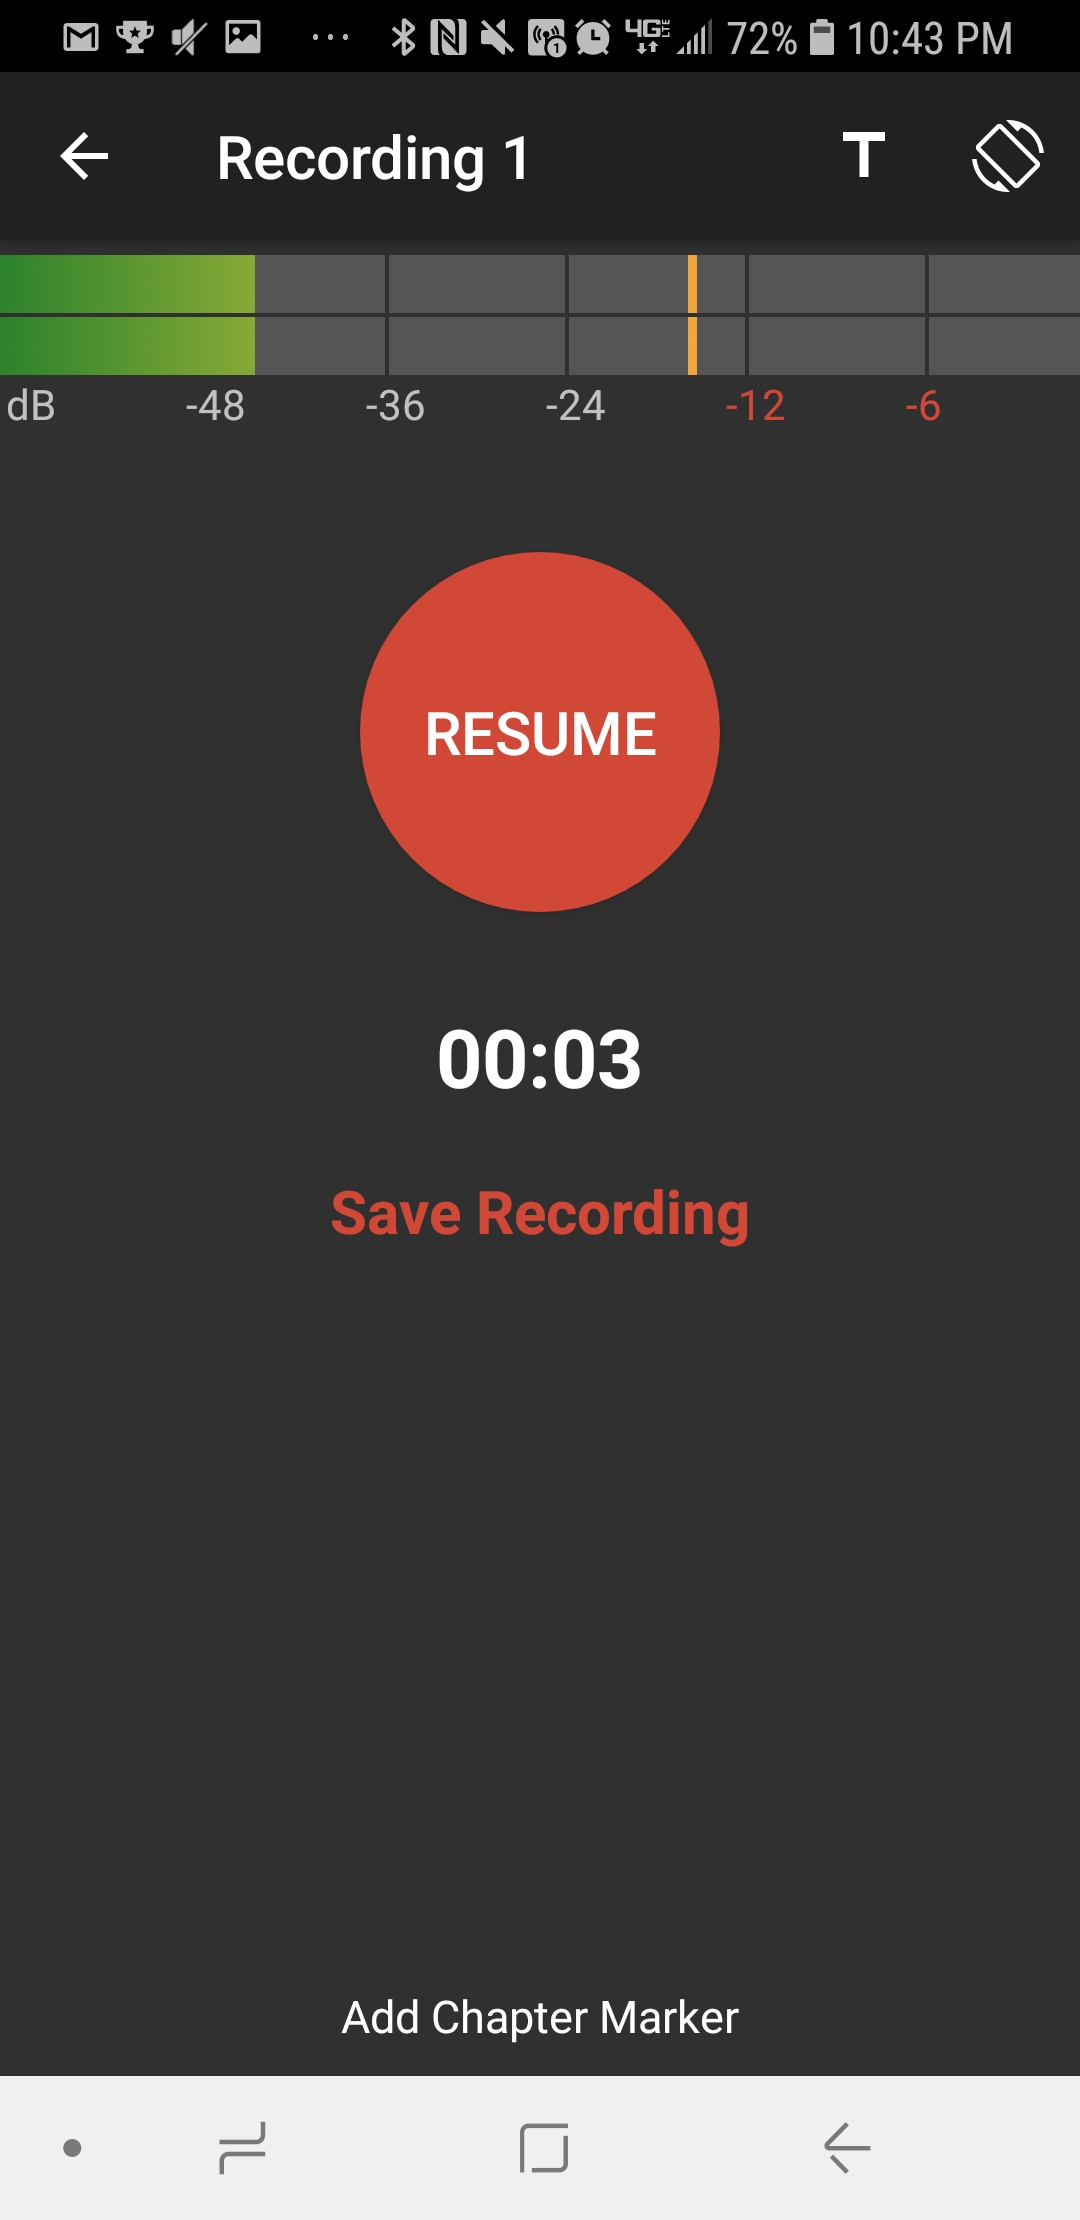 Stop Recording and Save